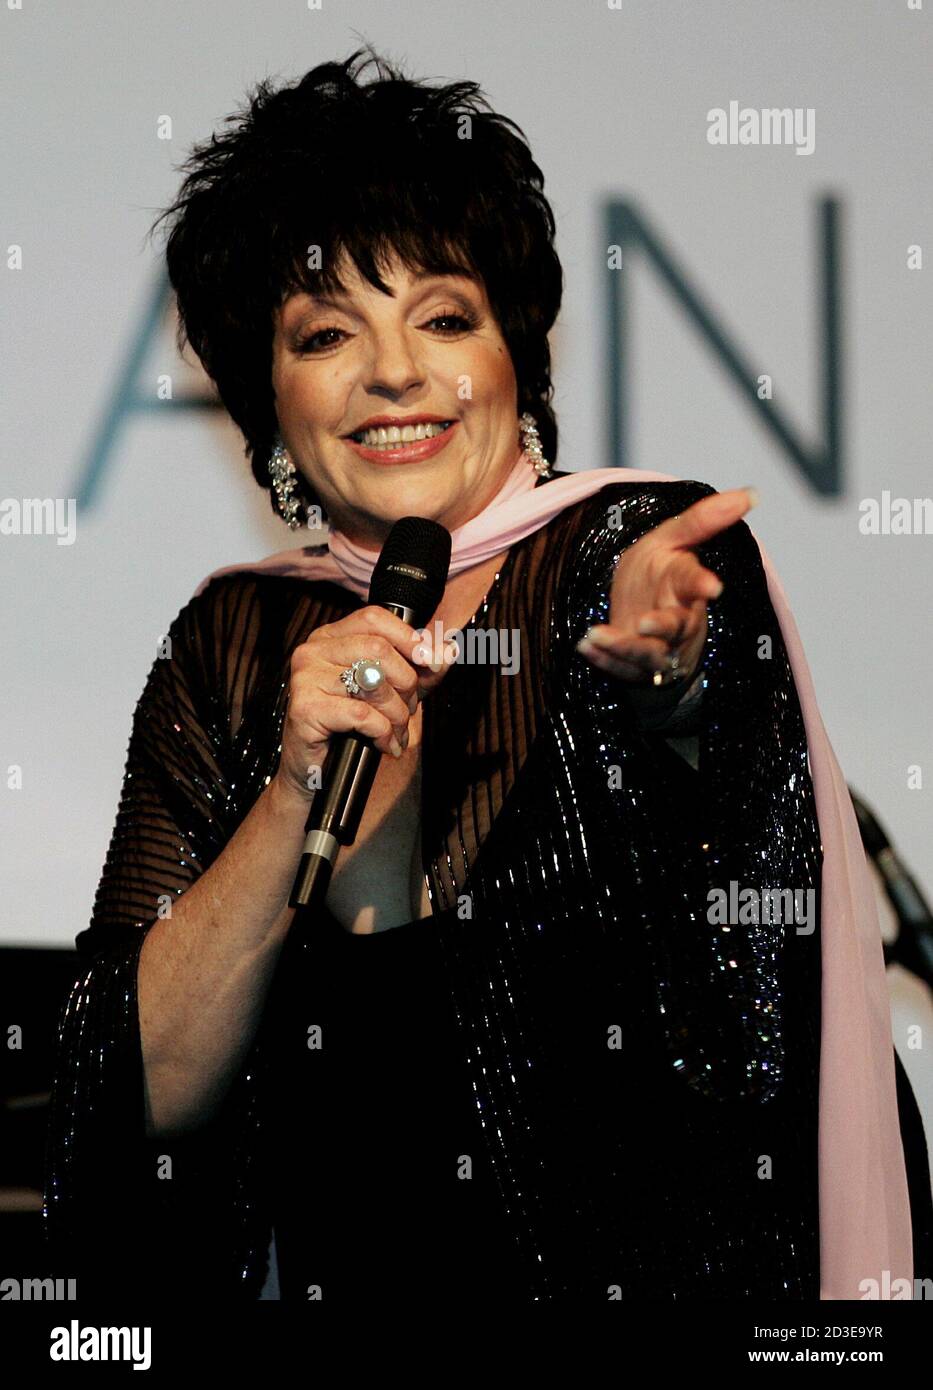 Liza May Minnelli High Resolution Stock Photography and Images - Alamy